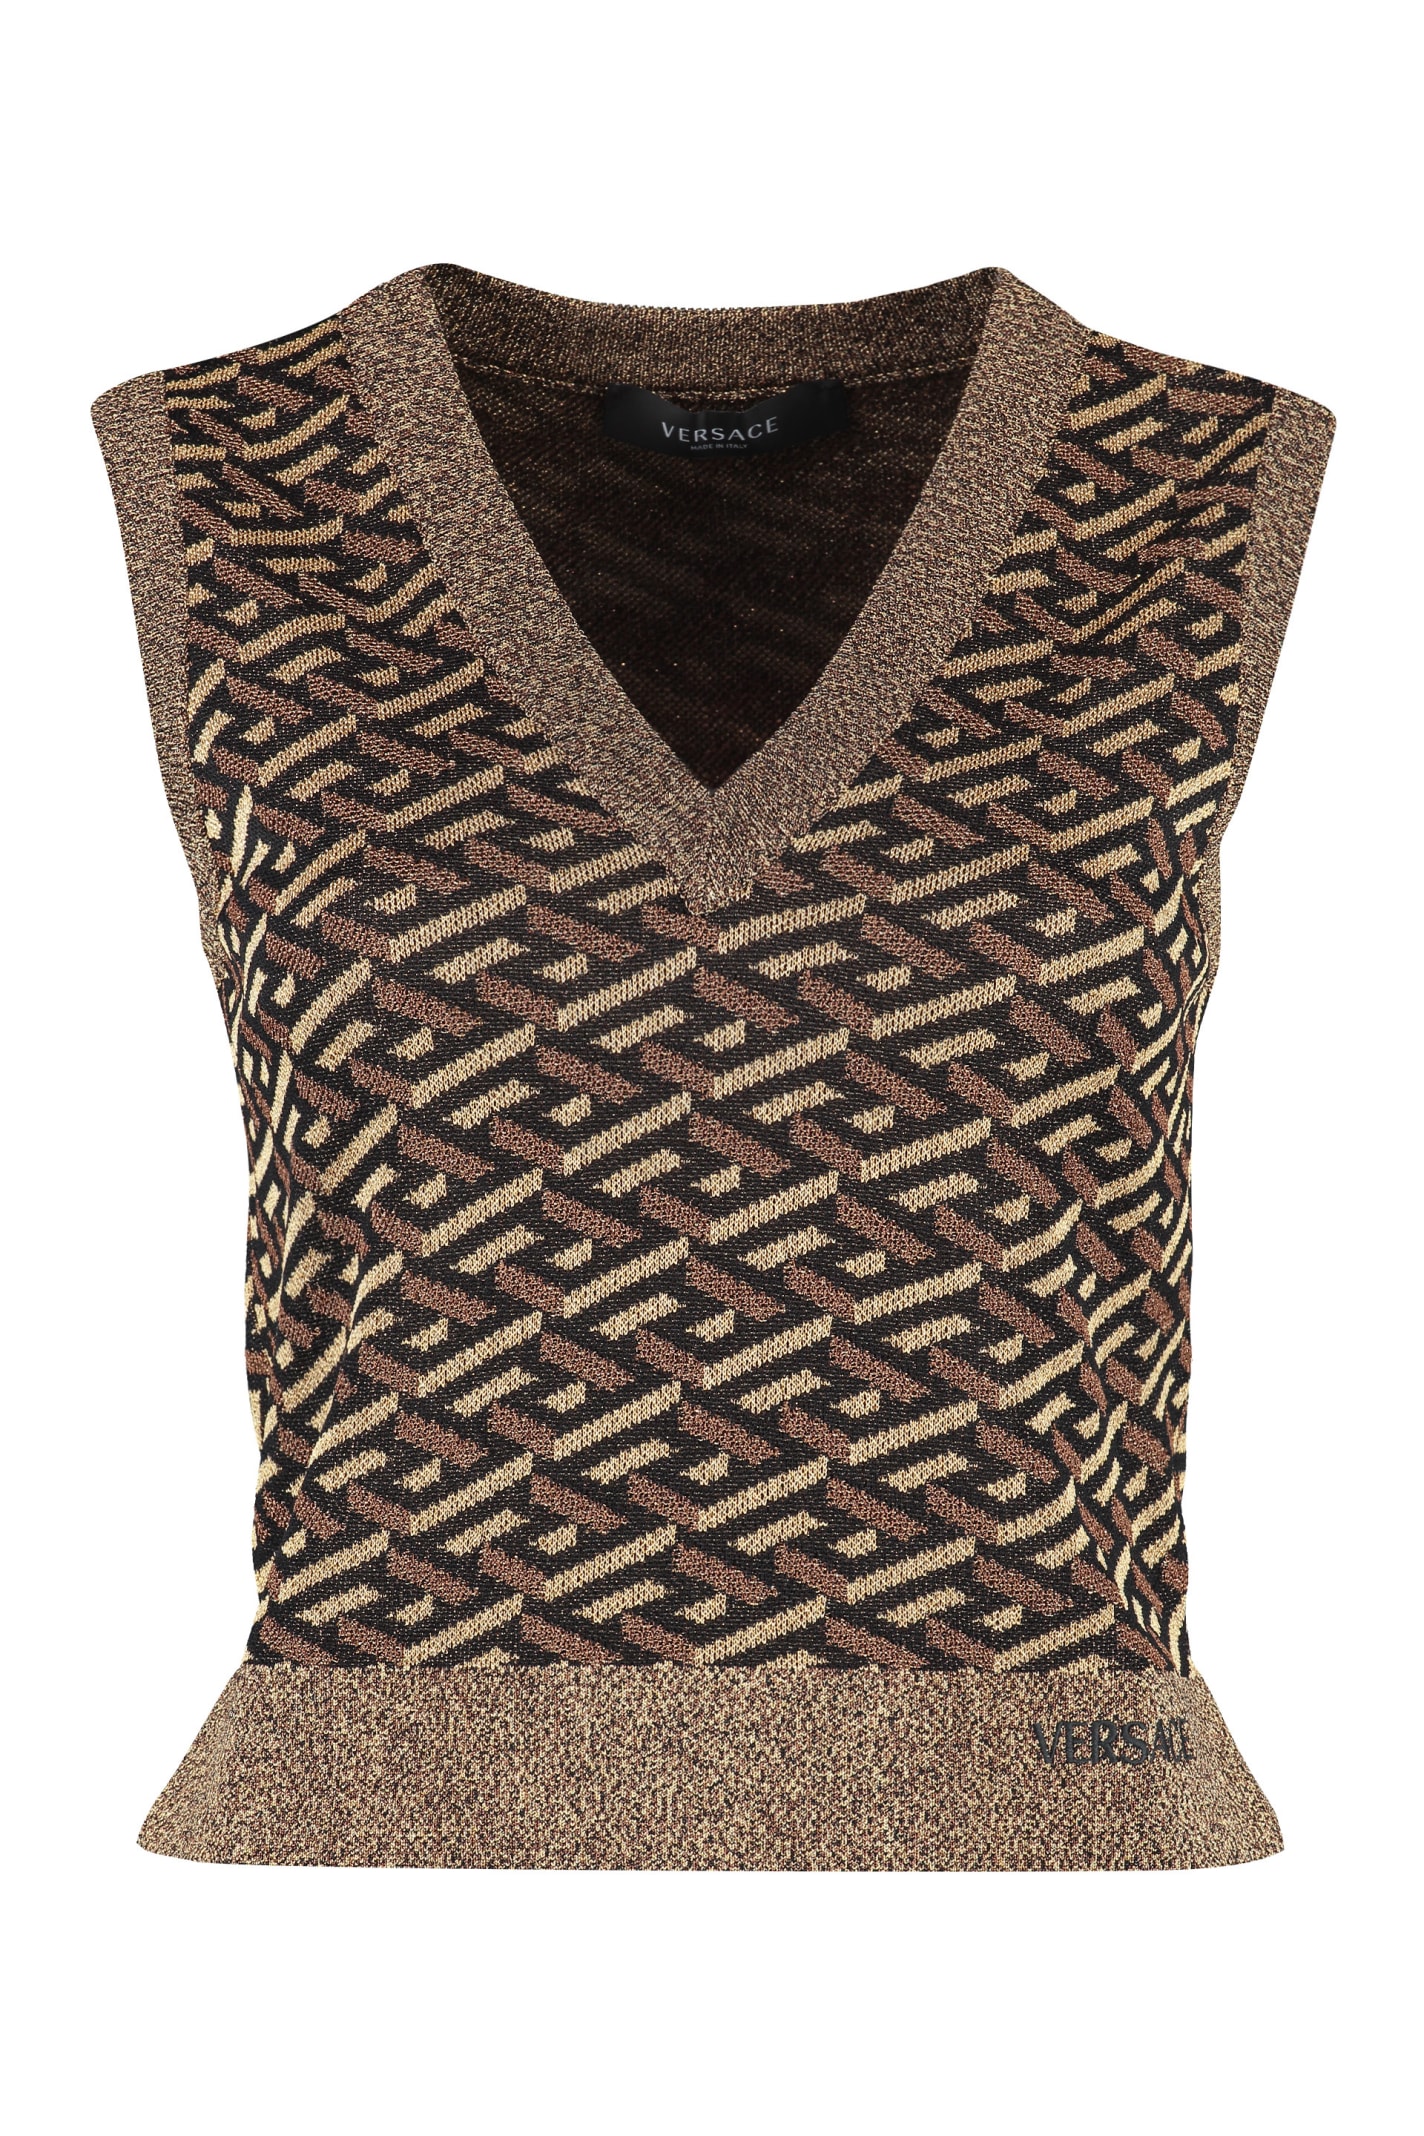 Versace Knitted Vest